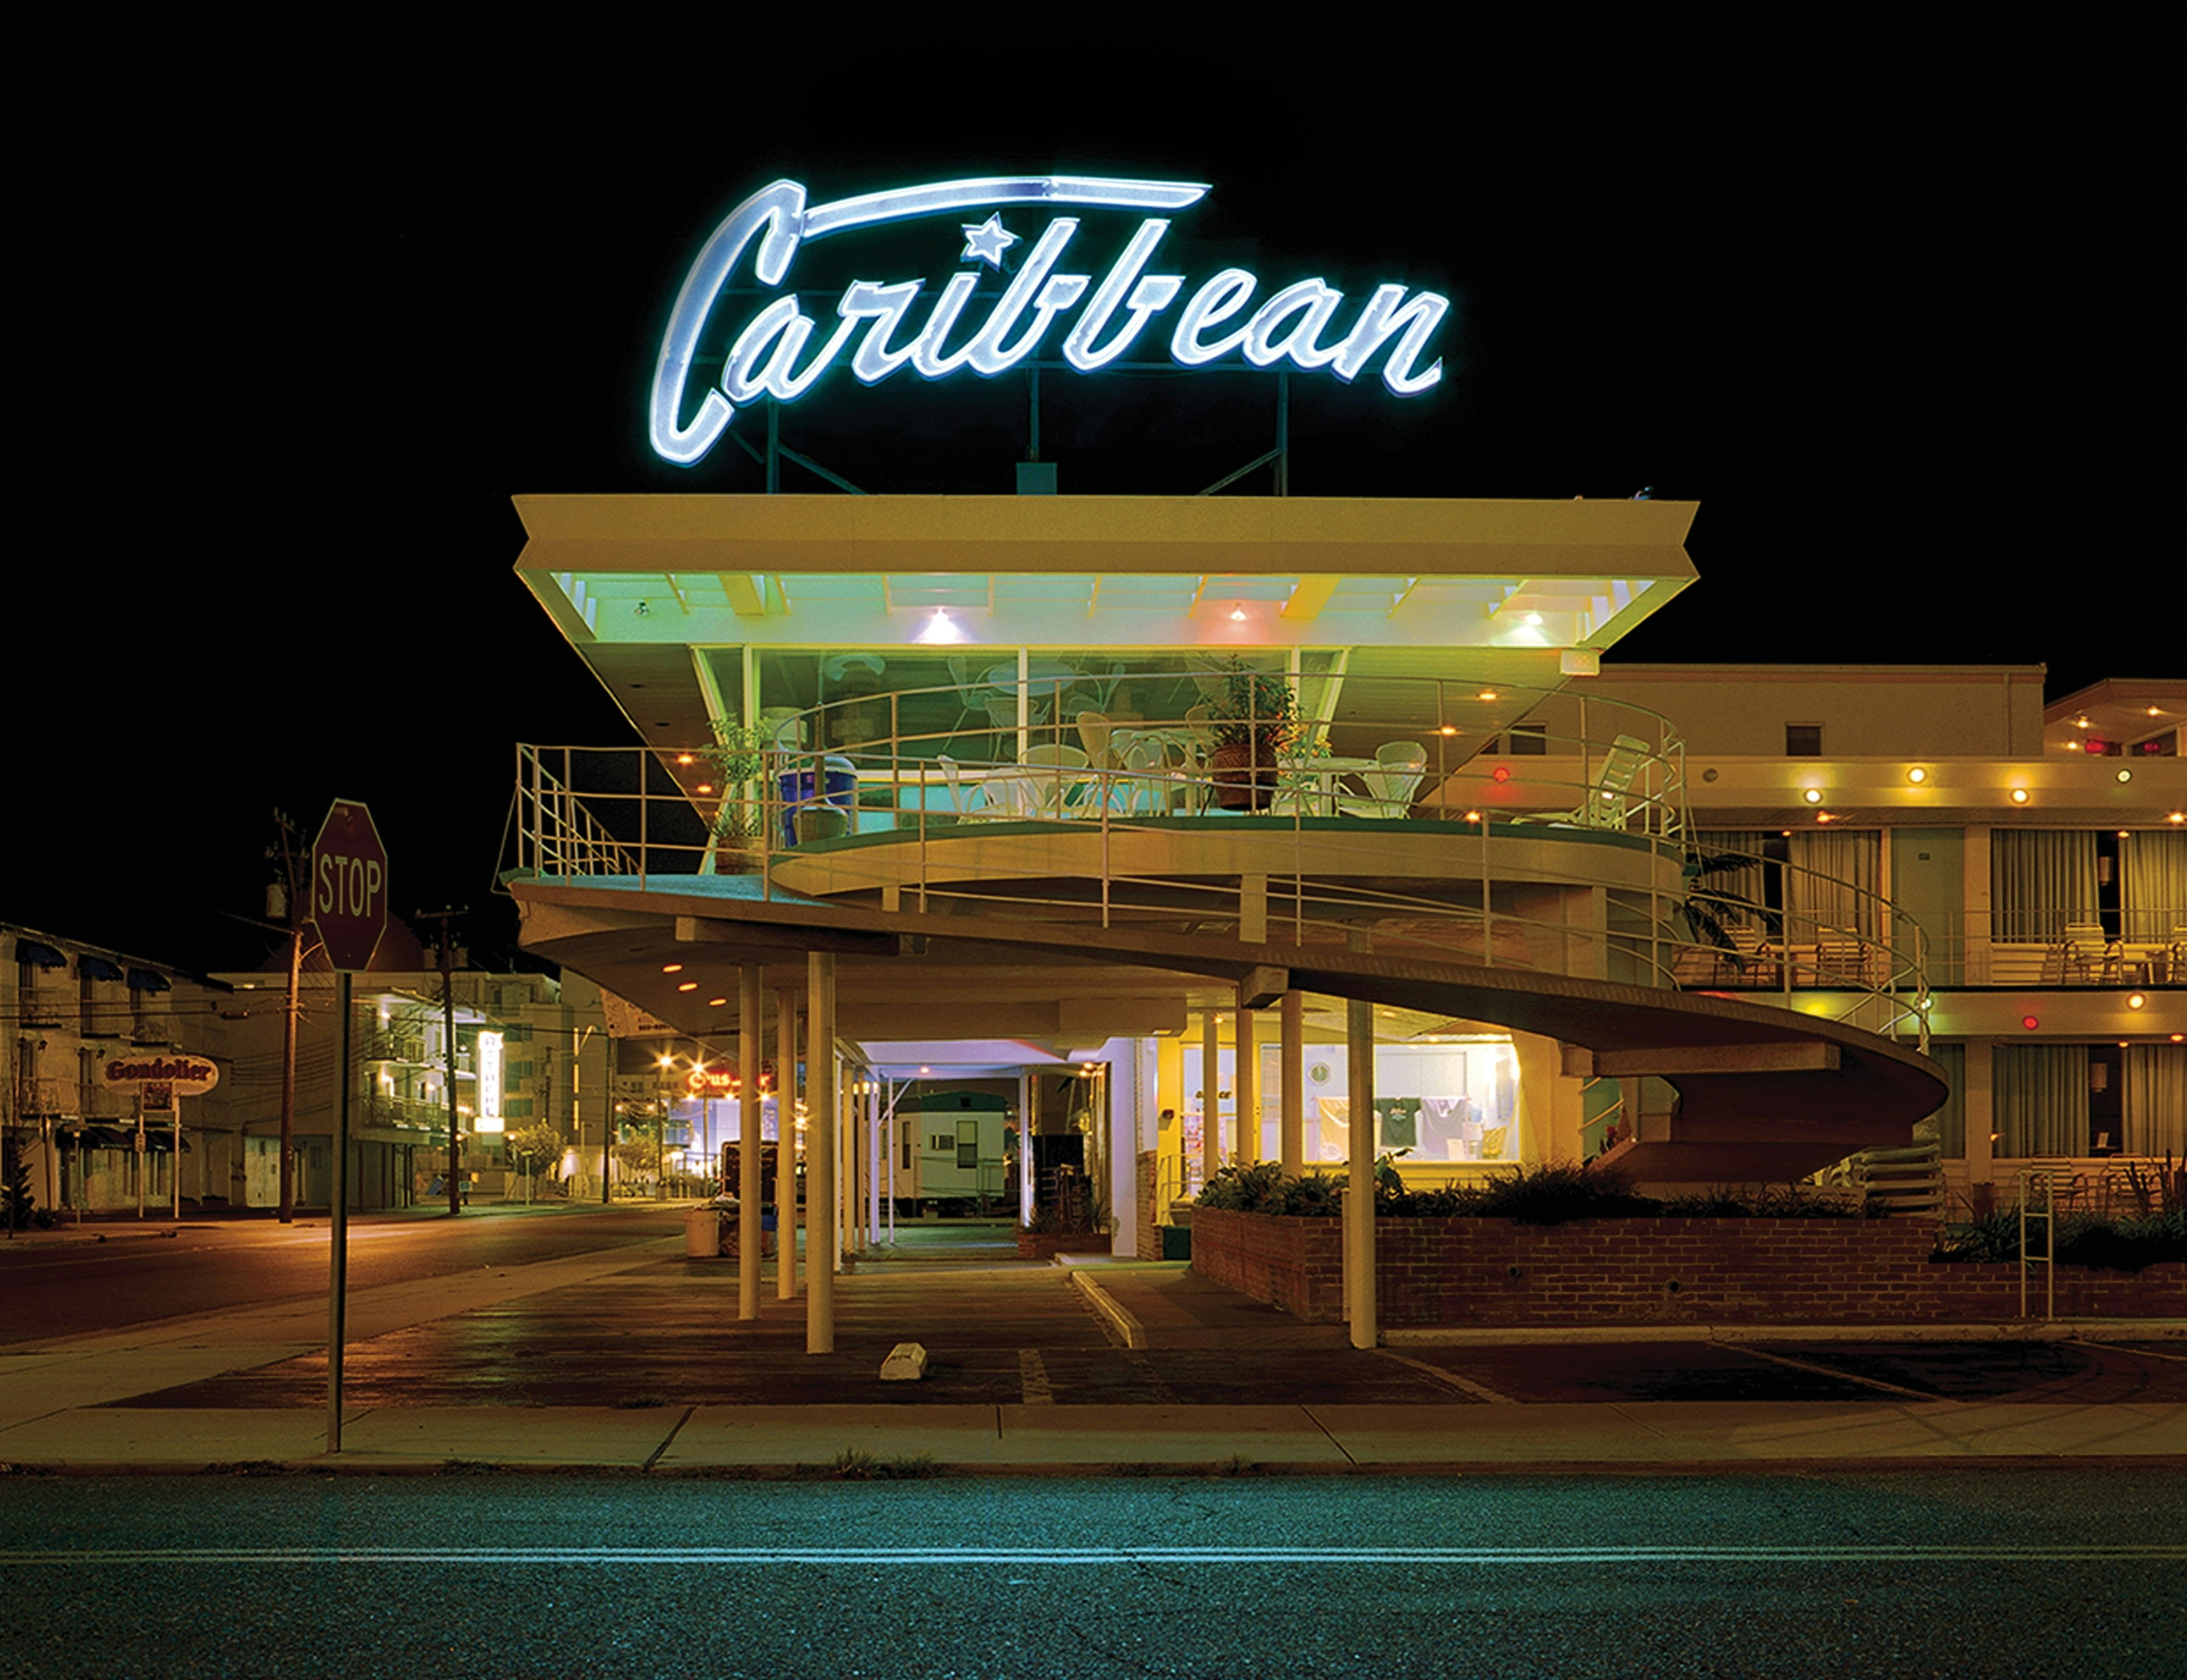 This photograph of the Caribbean, shot in 2007, showcases the distinctive curved ramp leading to the motel's second level.